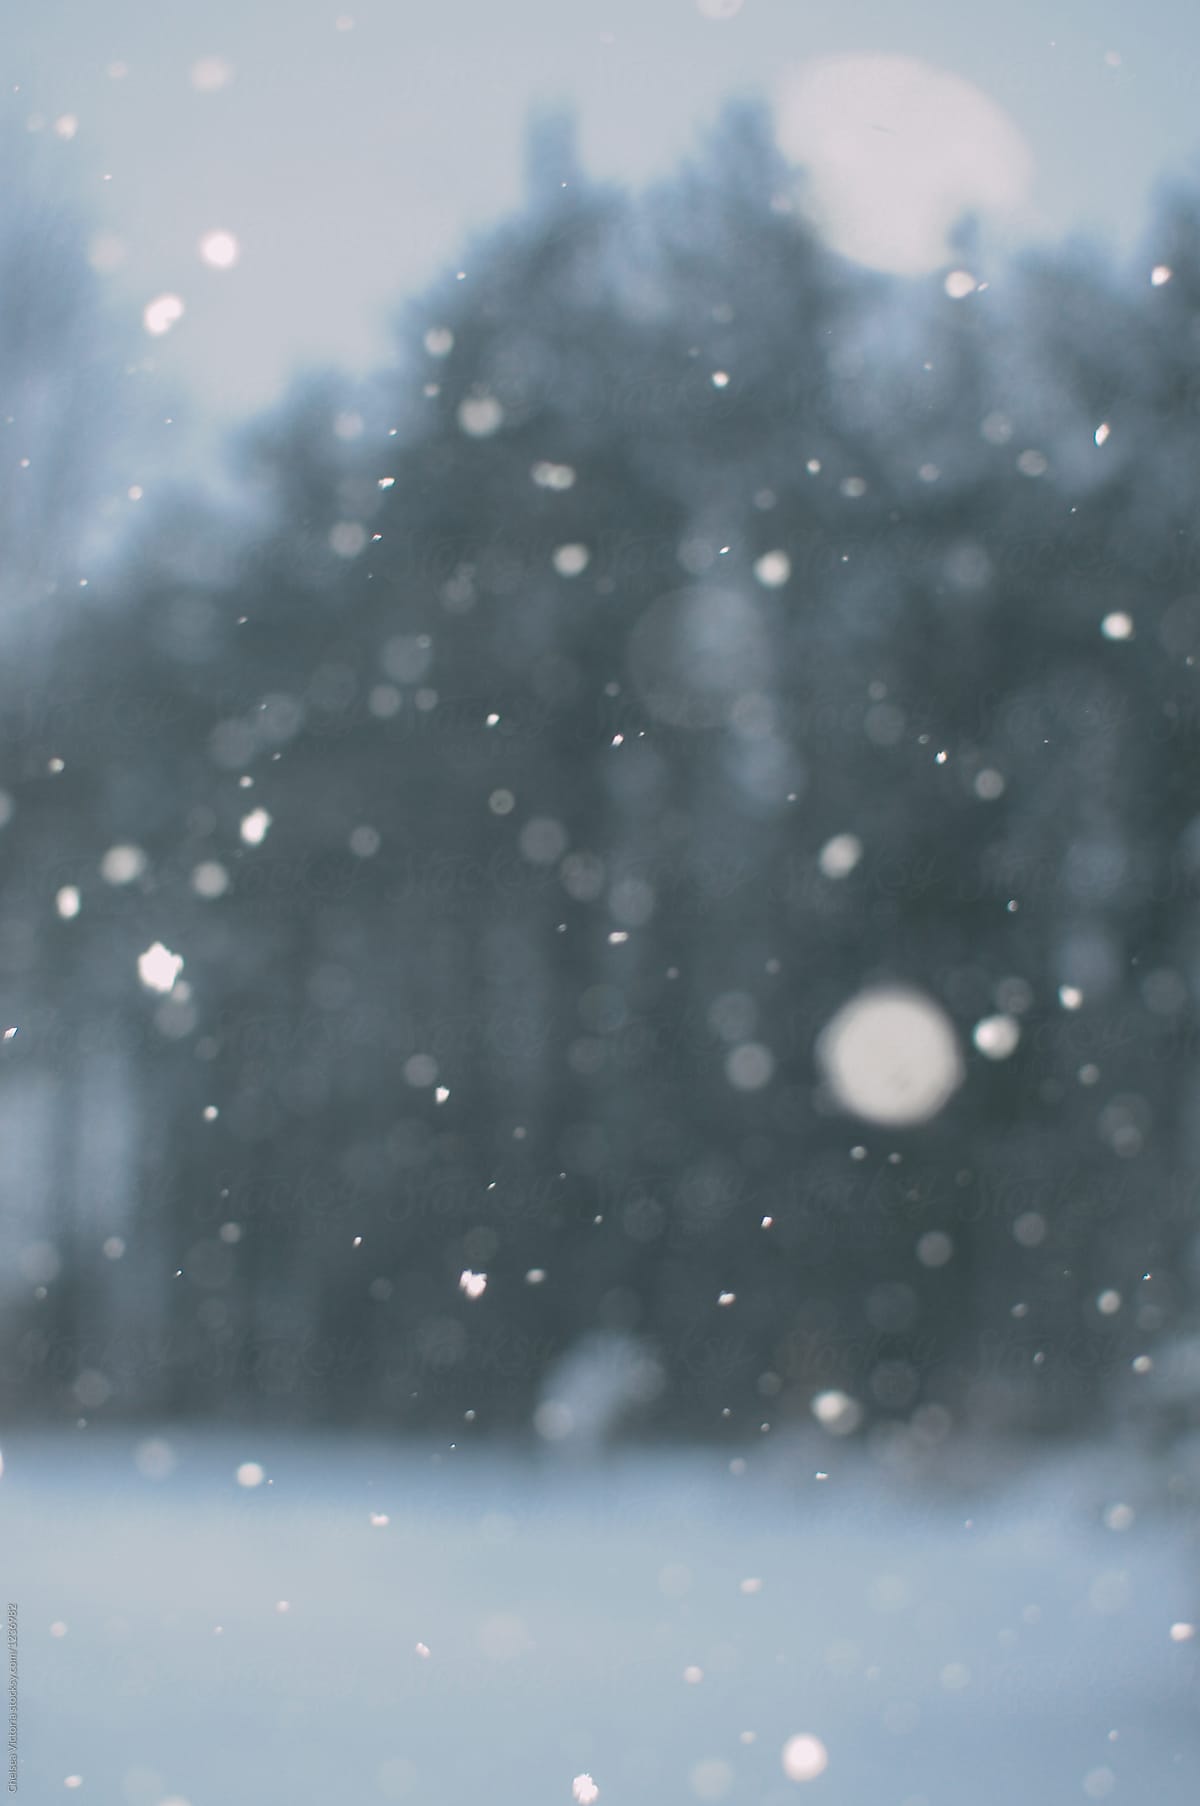 Out of focus snow